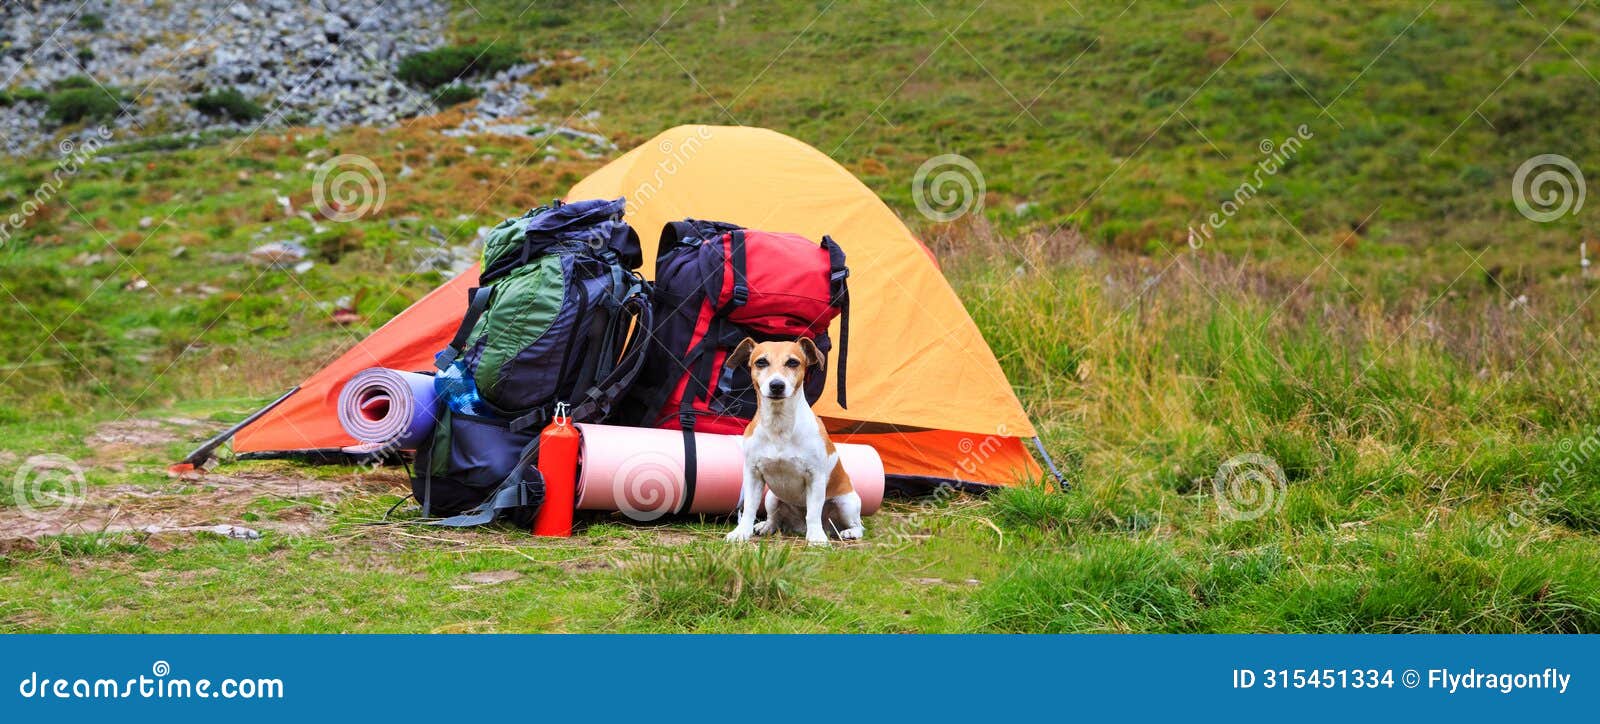 dog camping. small dog sits near a tent with backpacks on a hike